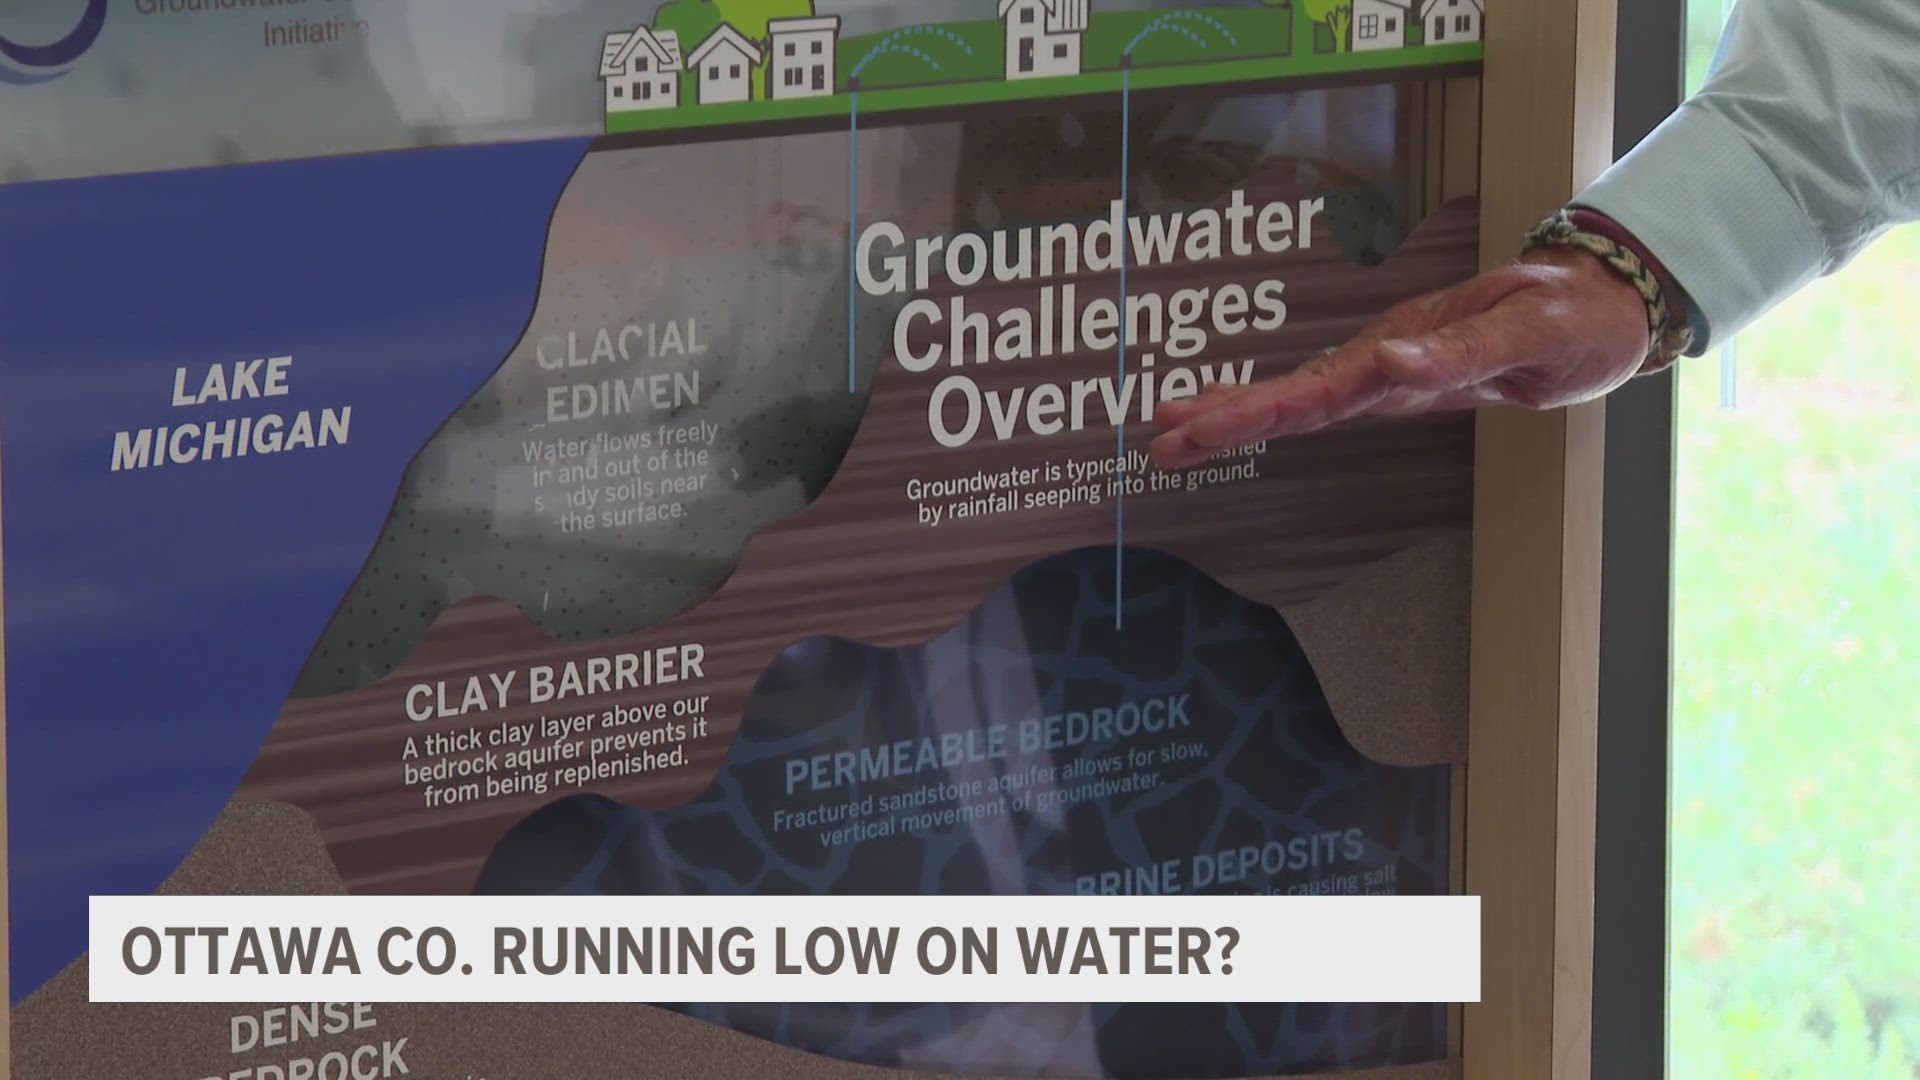 There's a critical water issue in Ottawa County with groundwater levels continuing to decline.